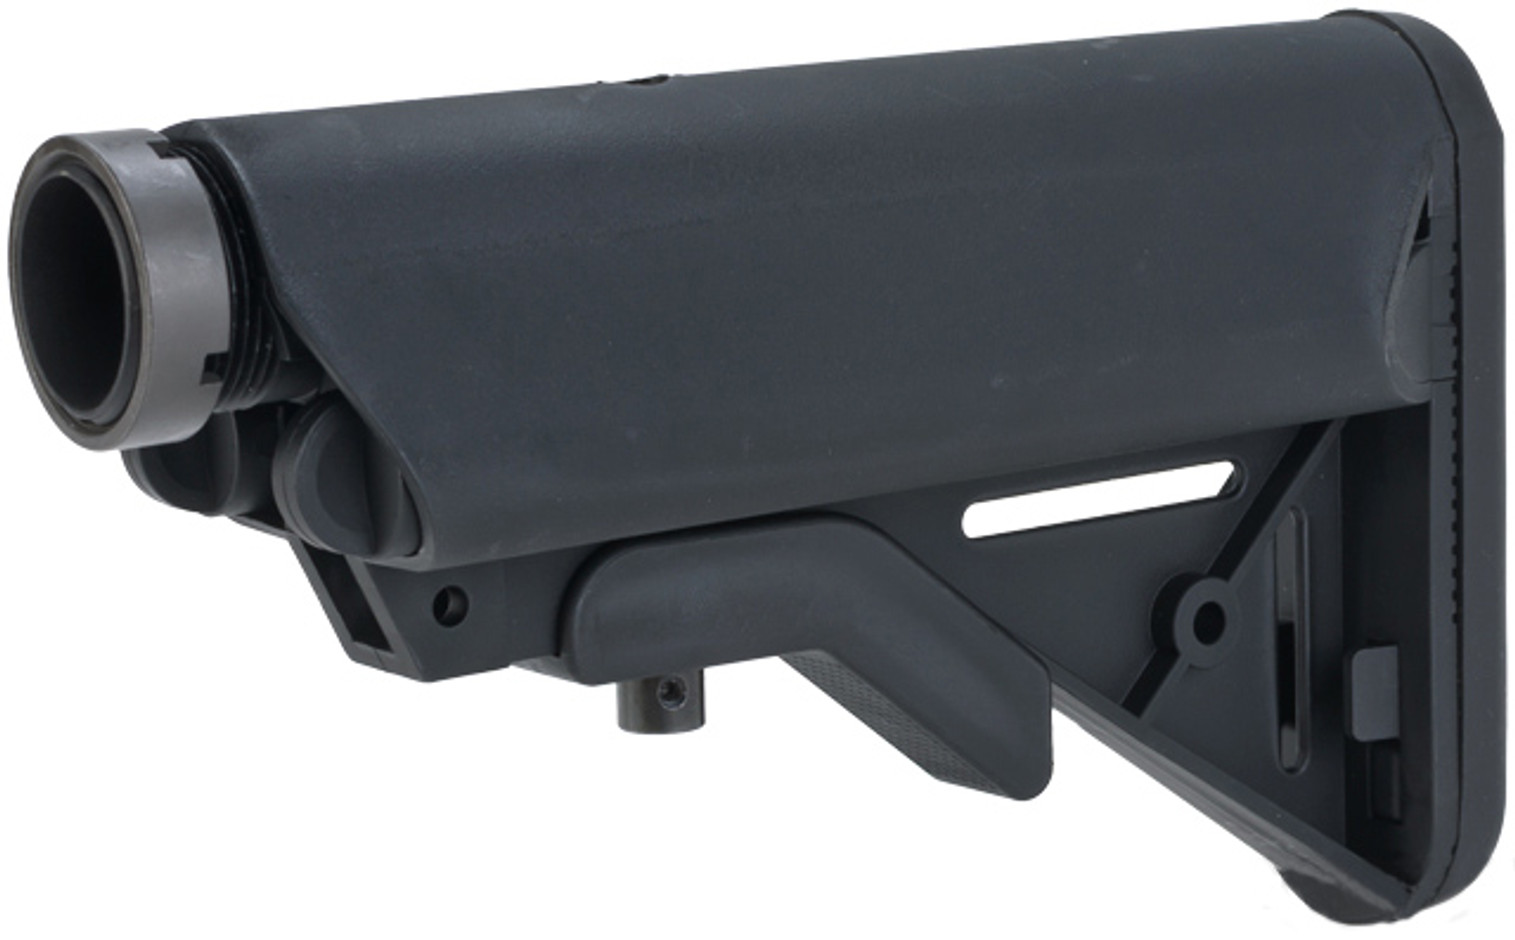 WE-Tech Crane Stock Assembly for M4  M16 Series Airsoft AEG Rifles